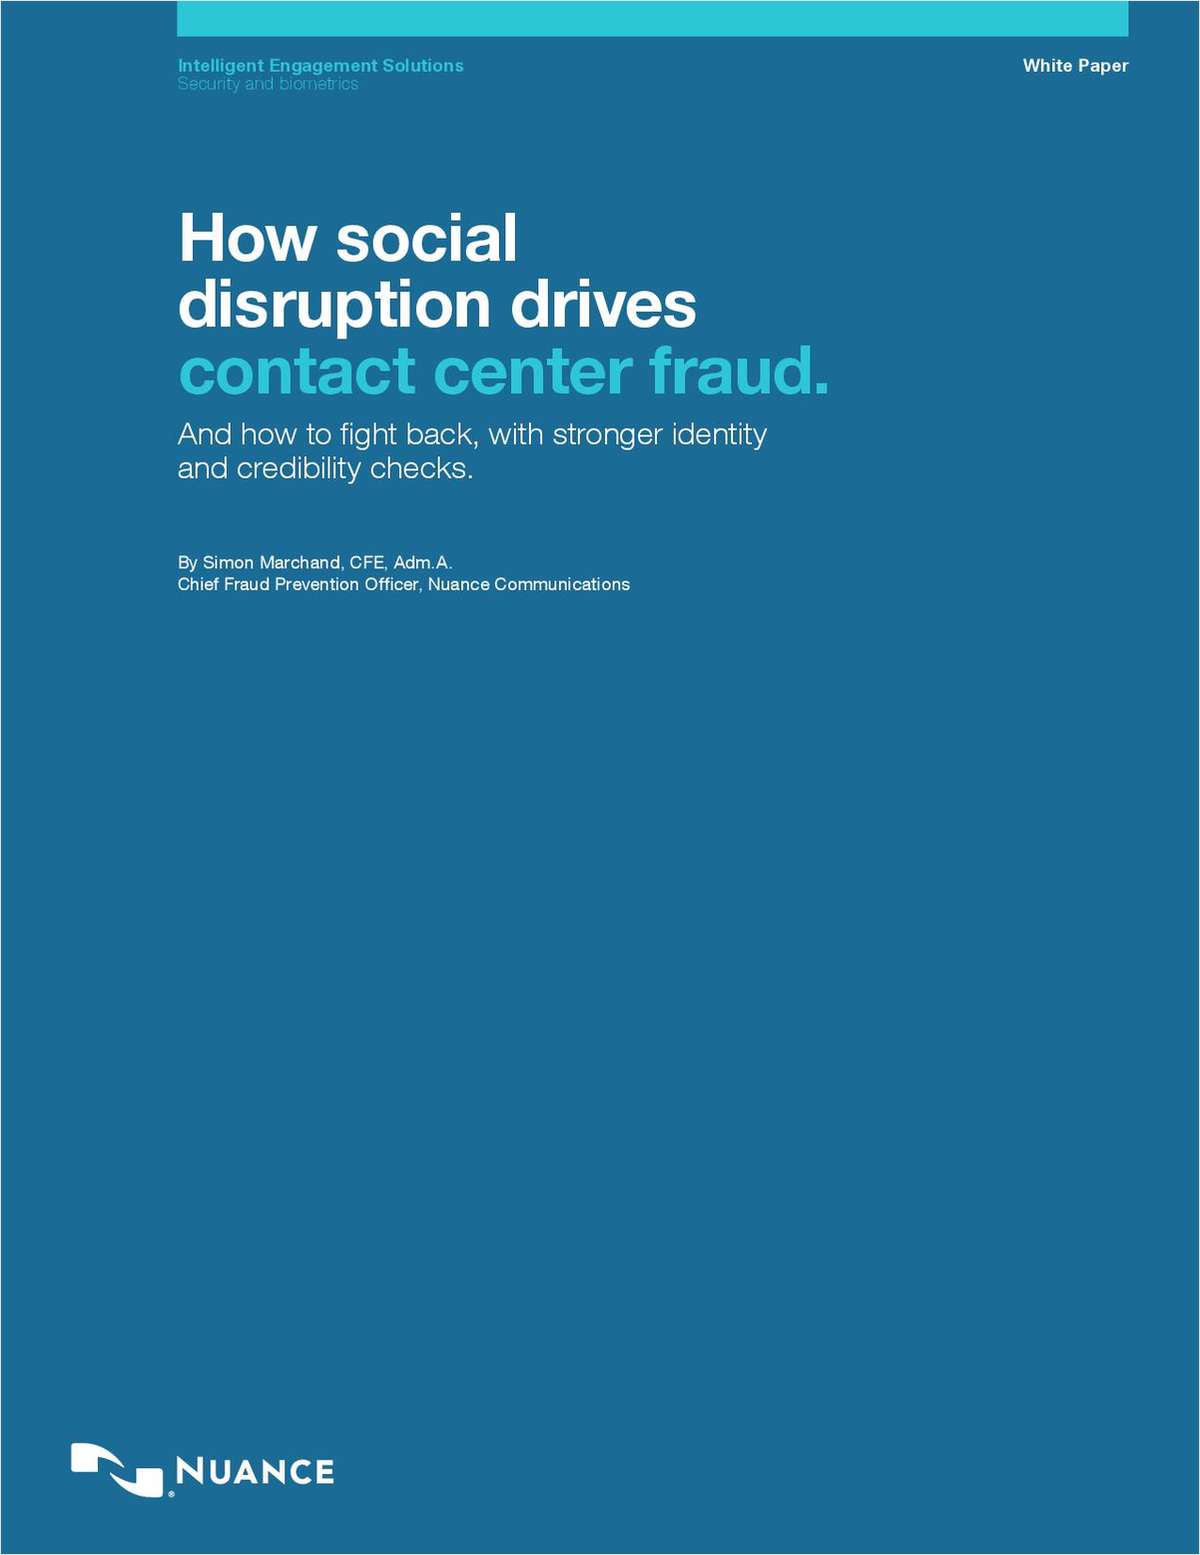 How Social Disruption Drives Contact Center Fraud